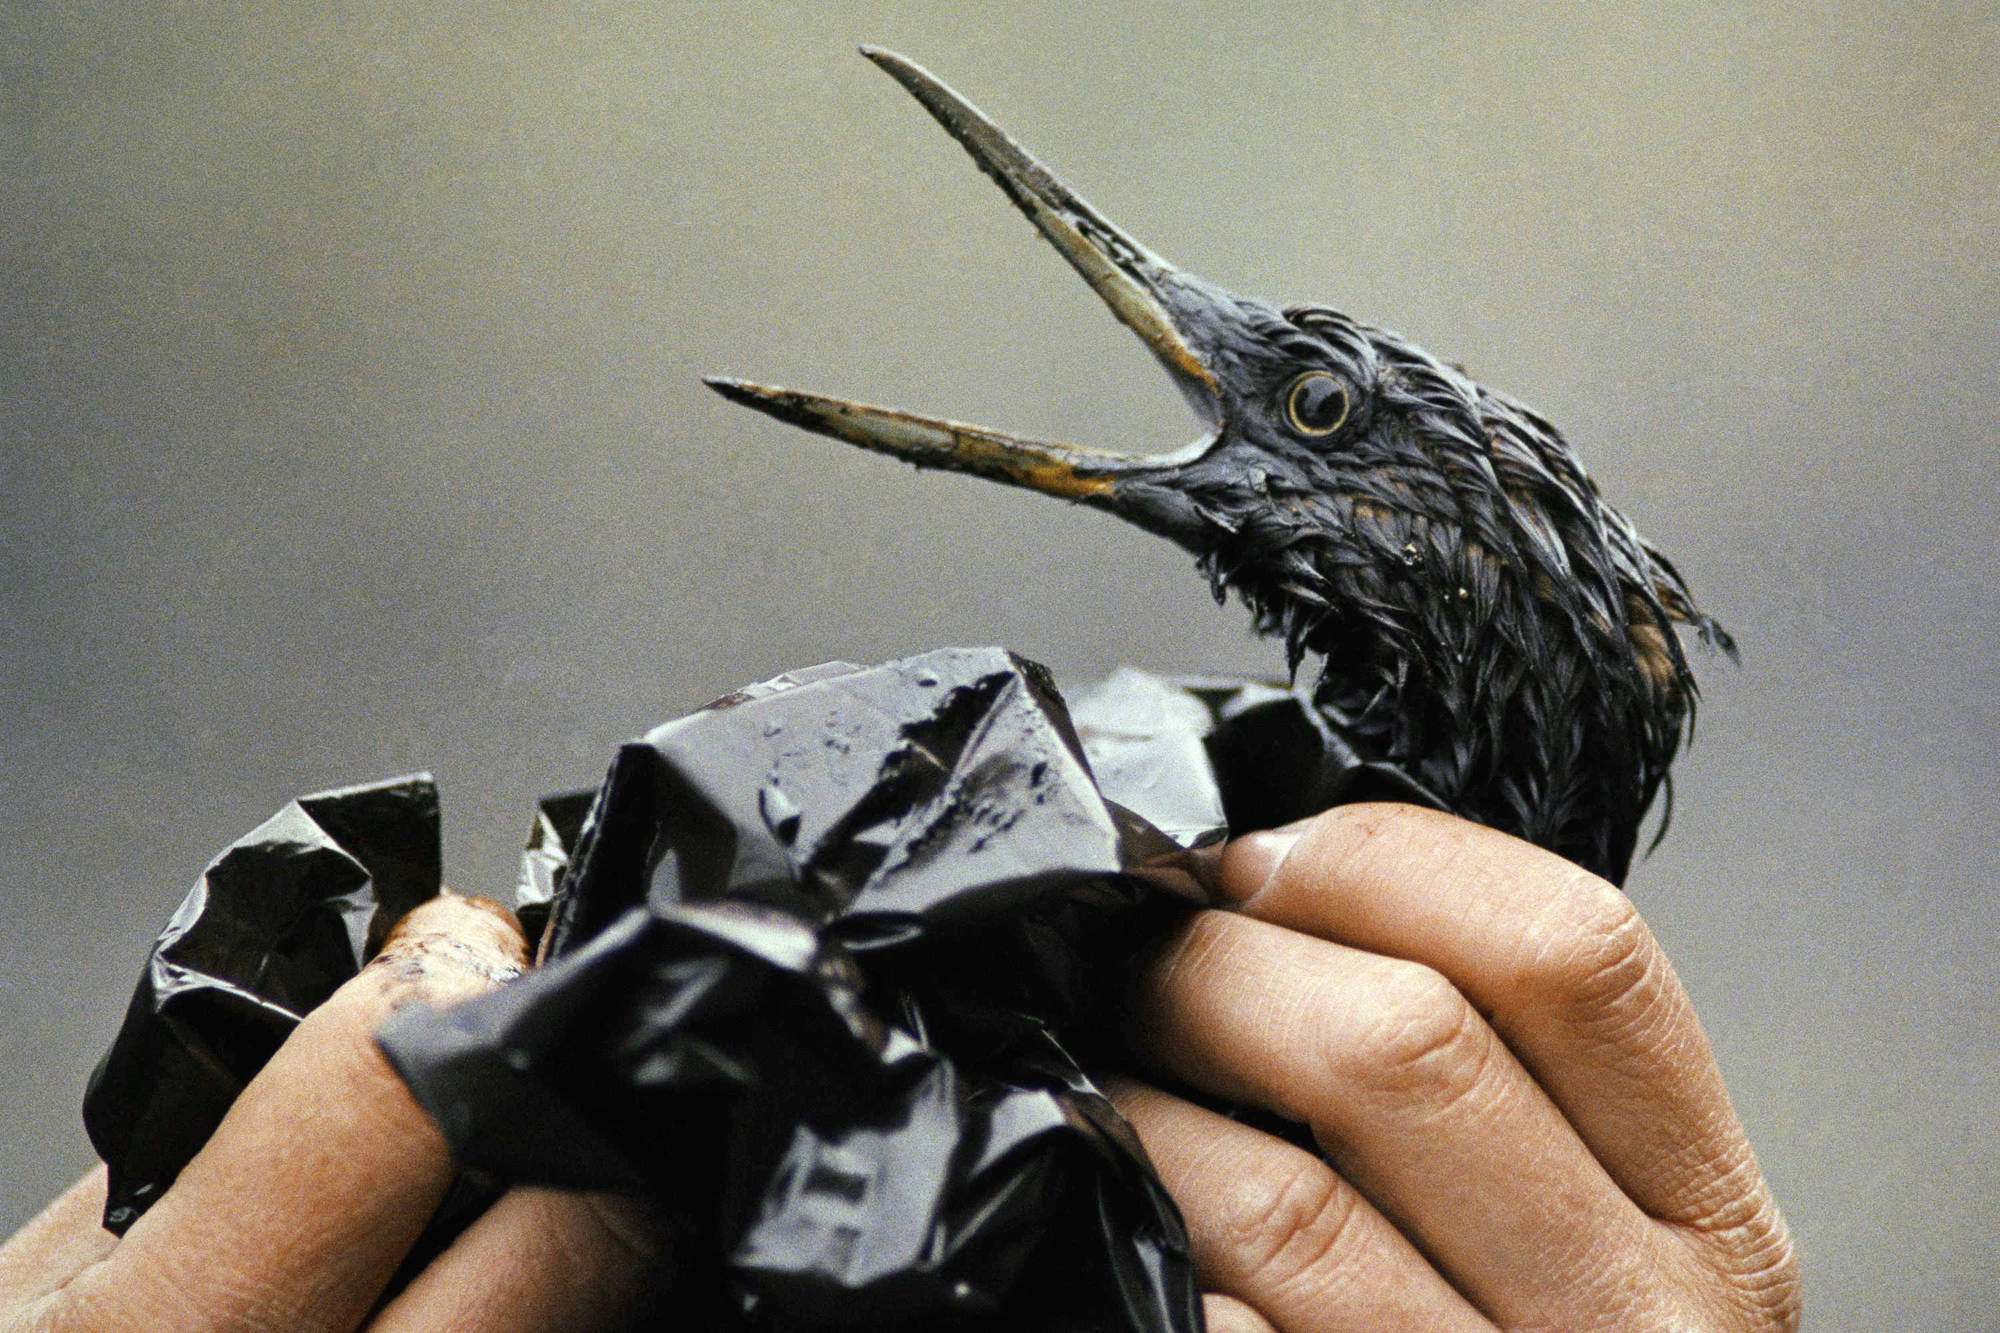 30th anniversary: Exxon Valdez oil spill inflicted lasting wounds